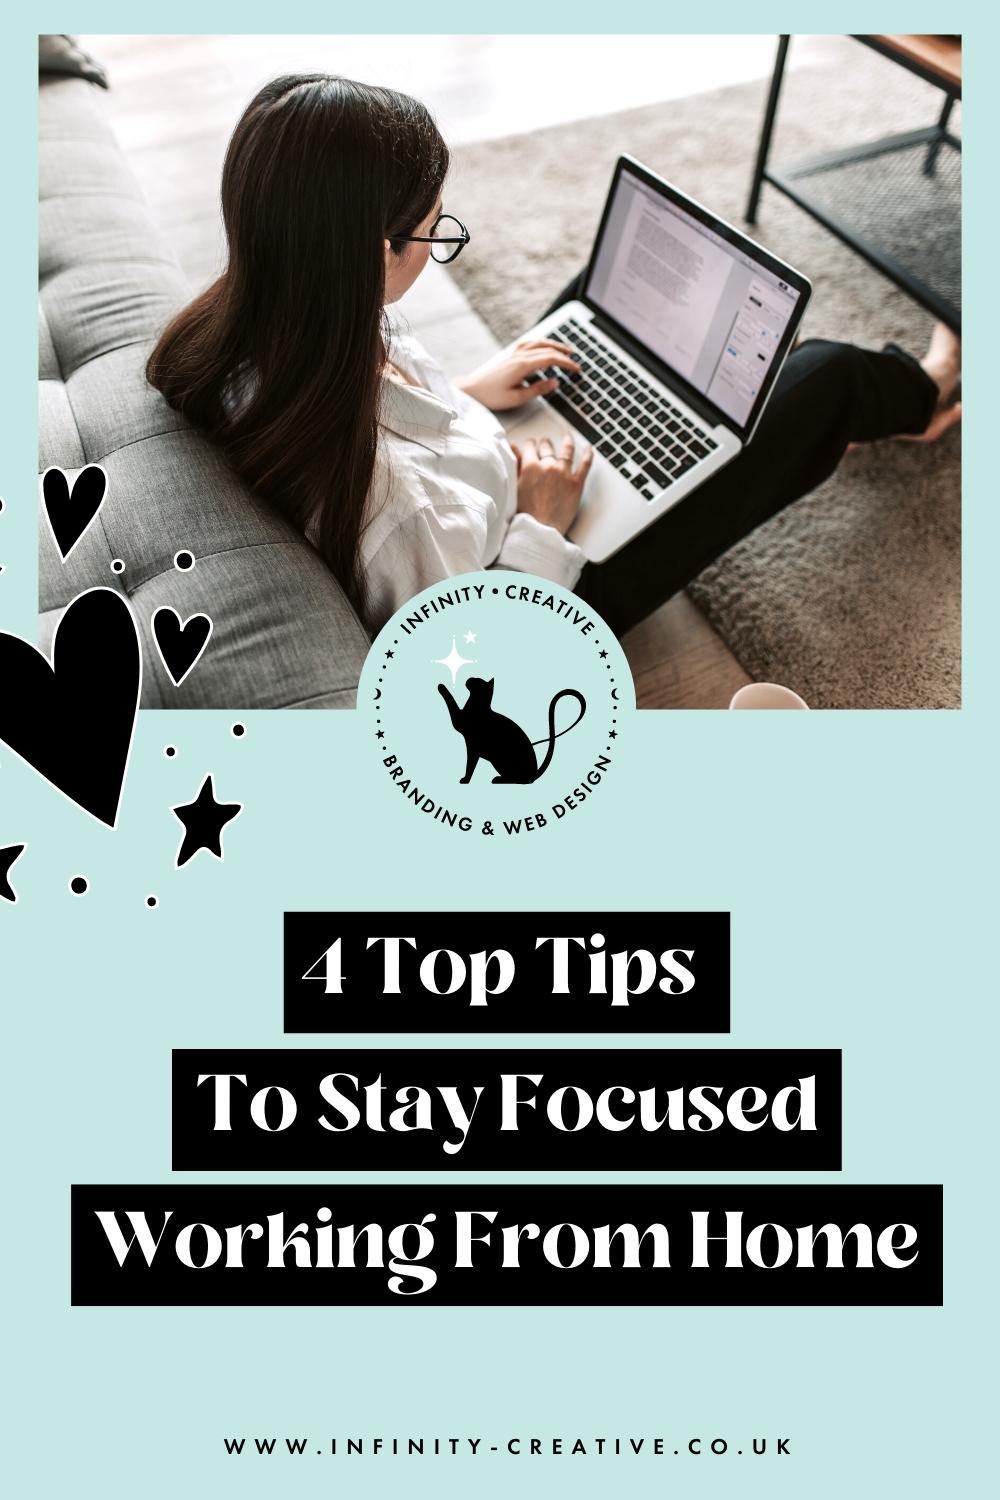 4 Top Tips To Stay Focused Working From Home